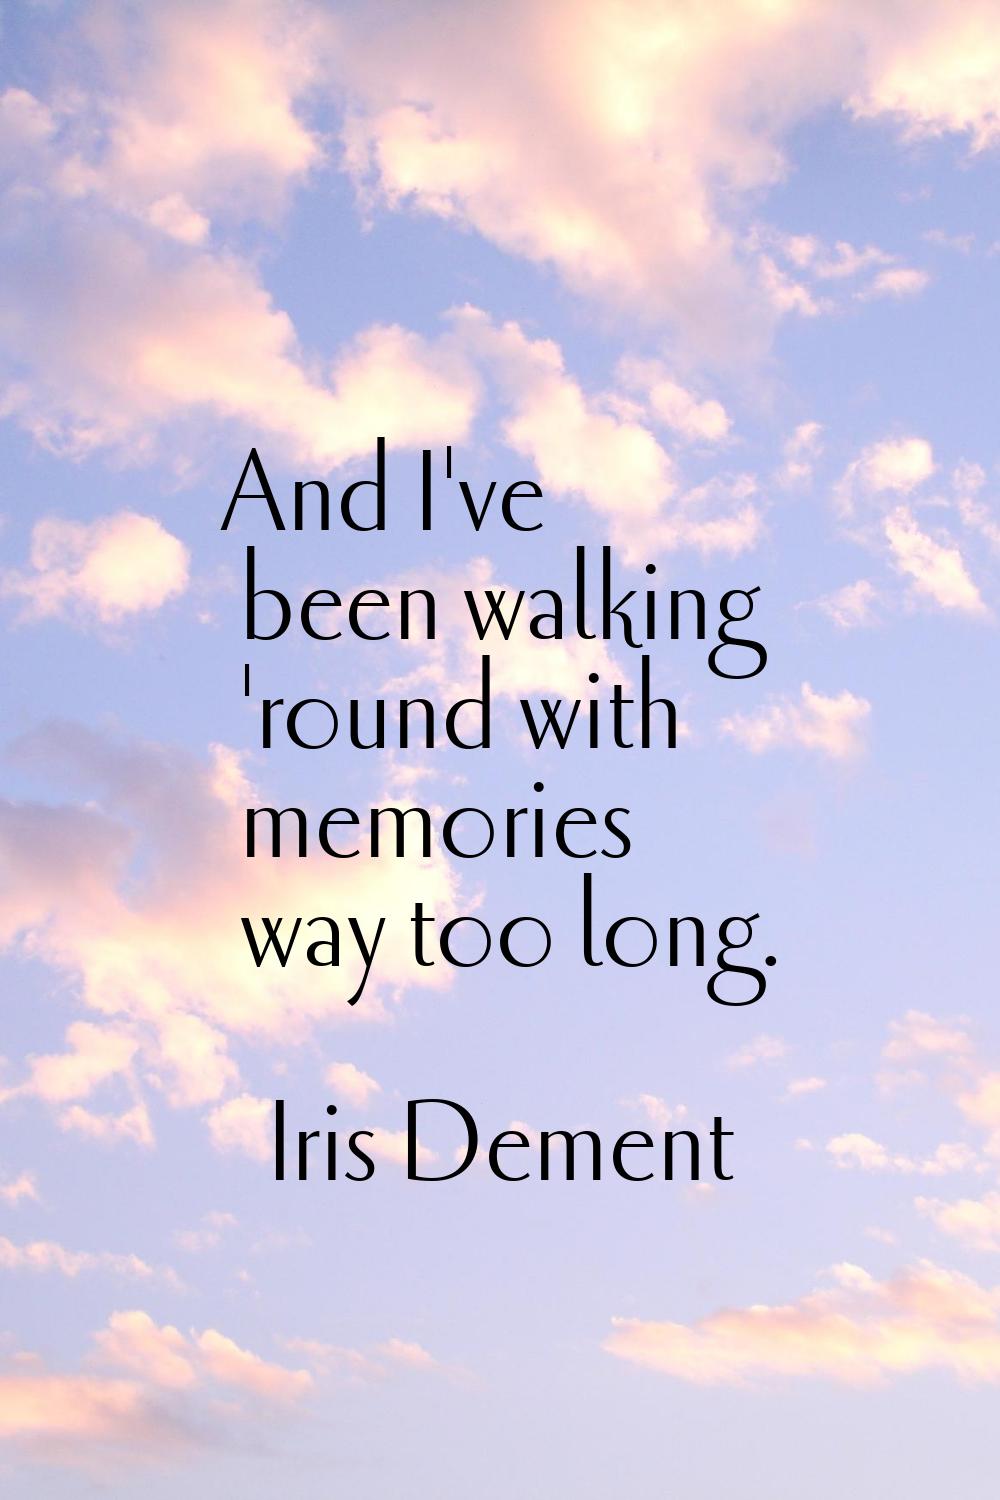 And I've been walking 'round with memories way too long.